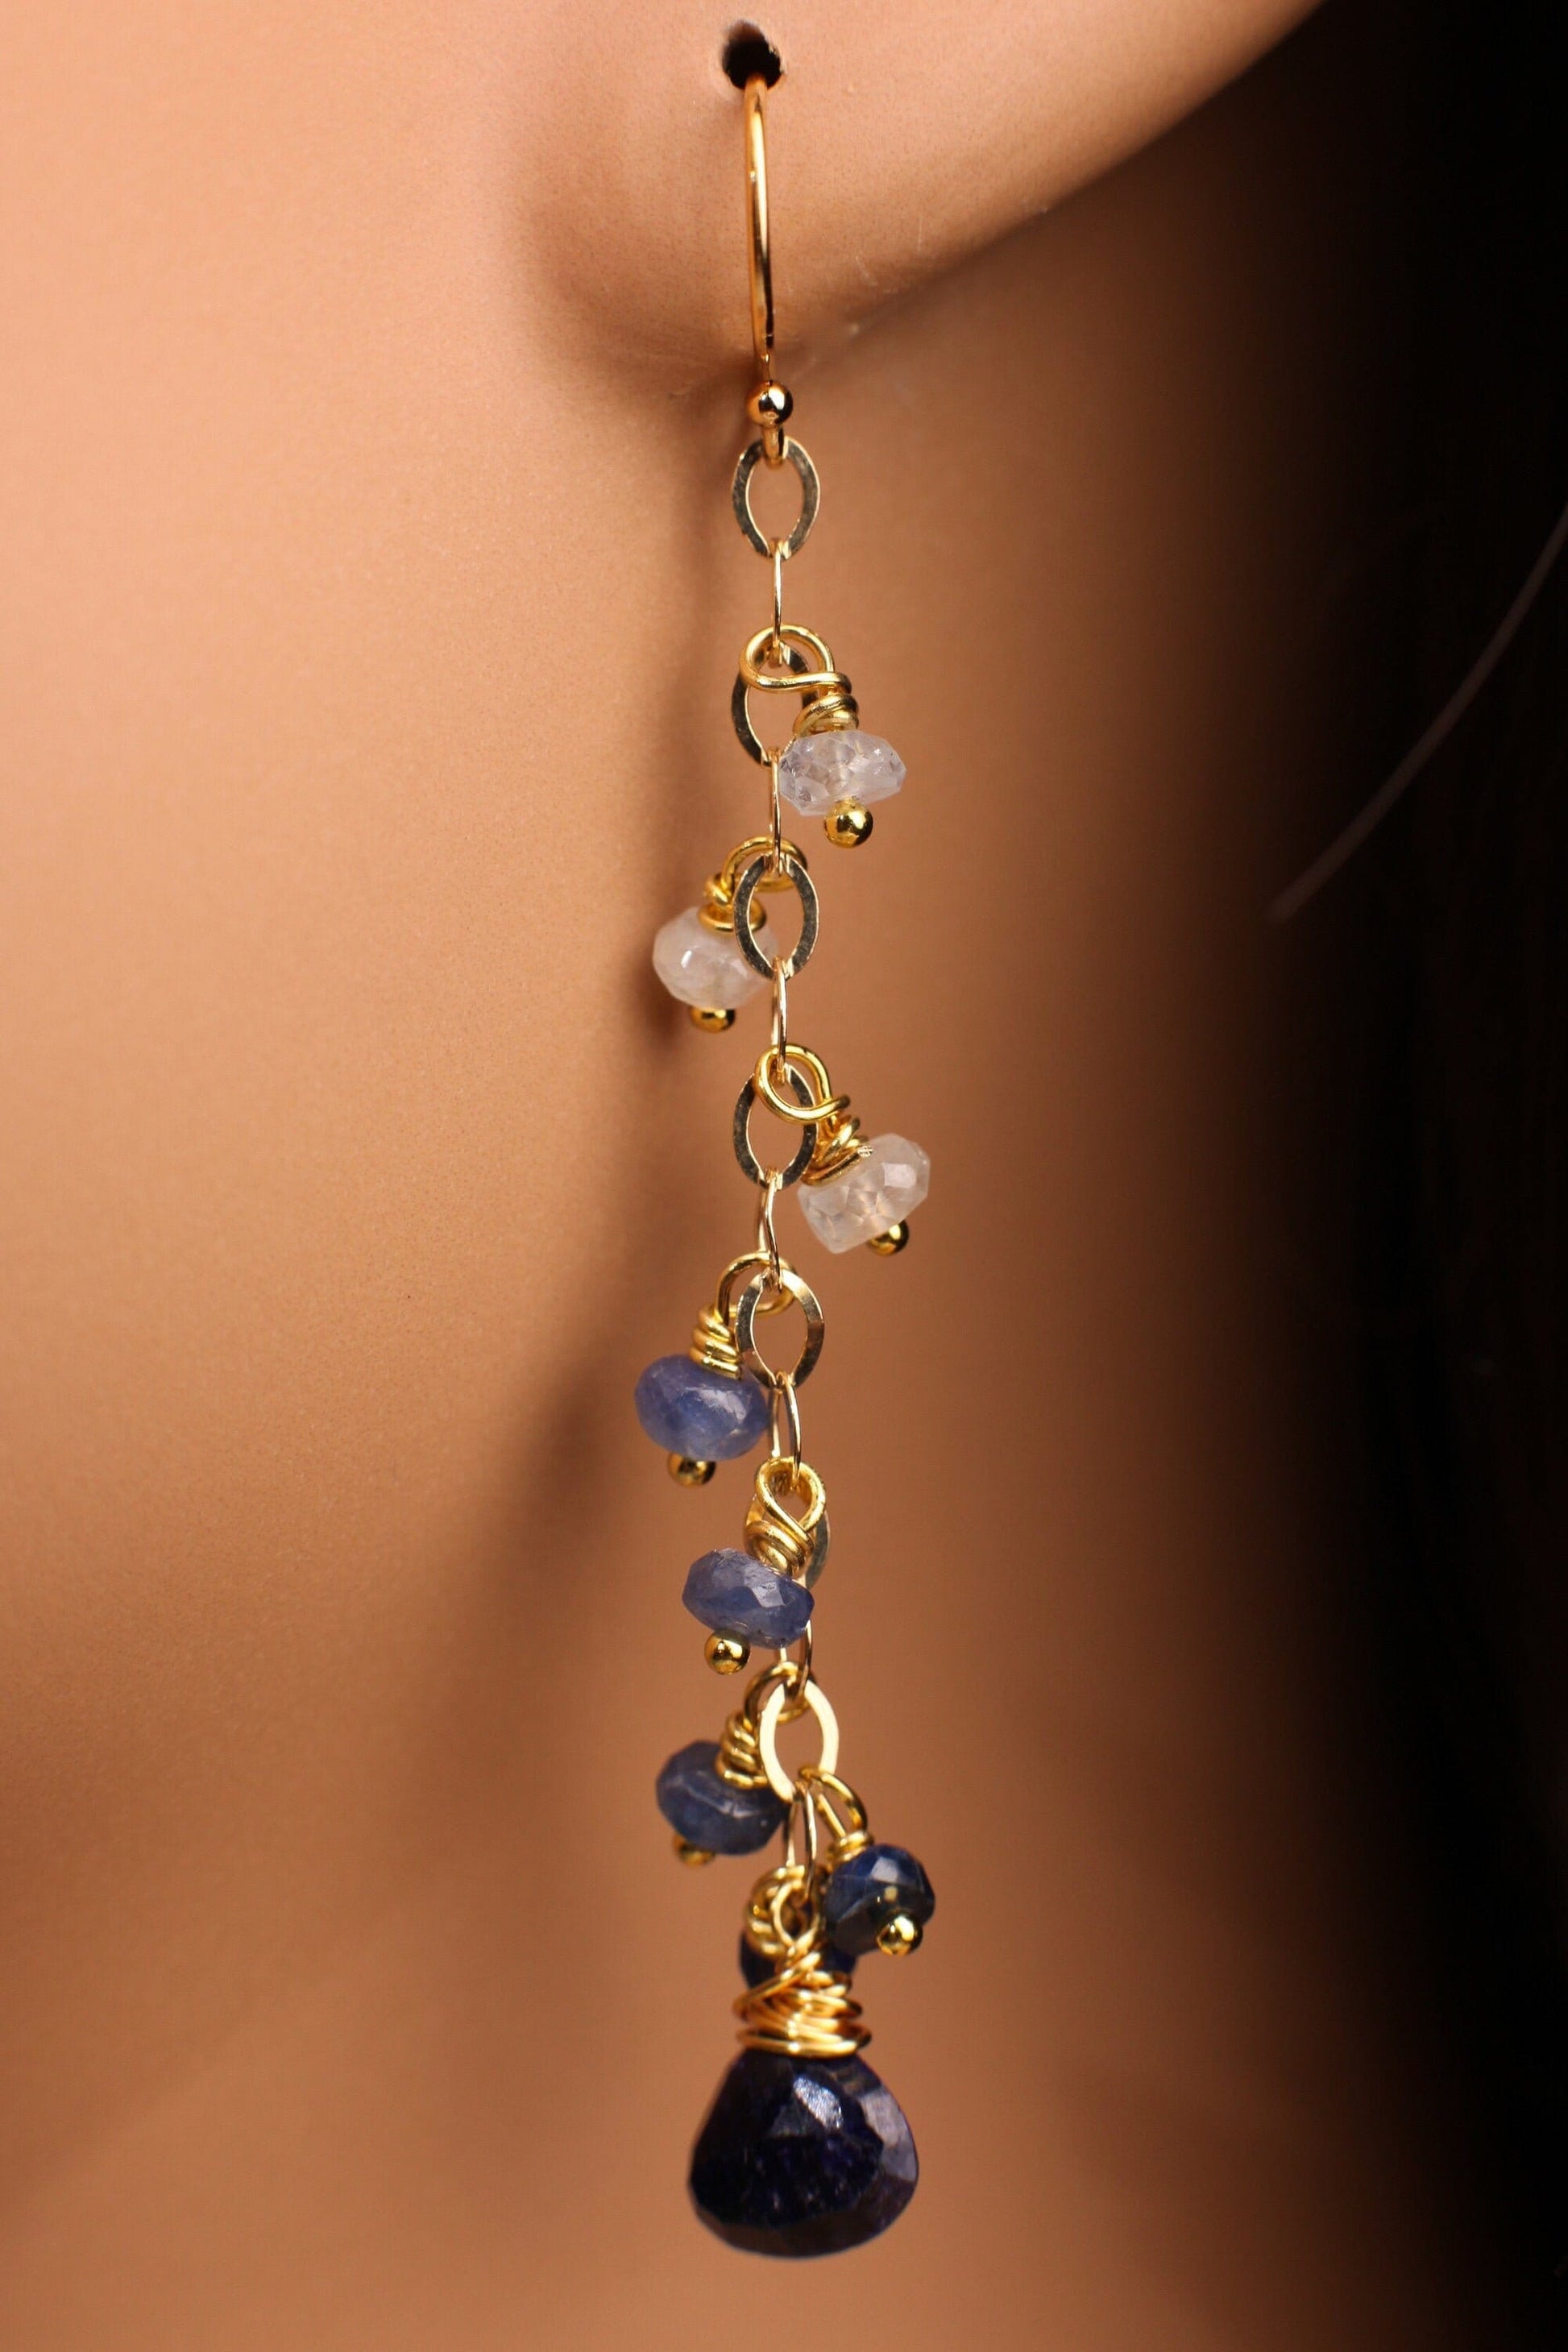 Ombre Sapphire earrings Wire Wrapped 7.5mm heart drop Dangling with 4mm faceted roundel in 14K Gold Filled hook or Leverback earwire